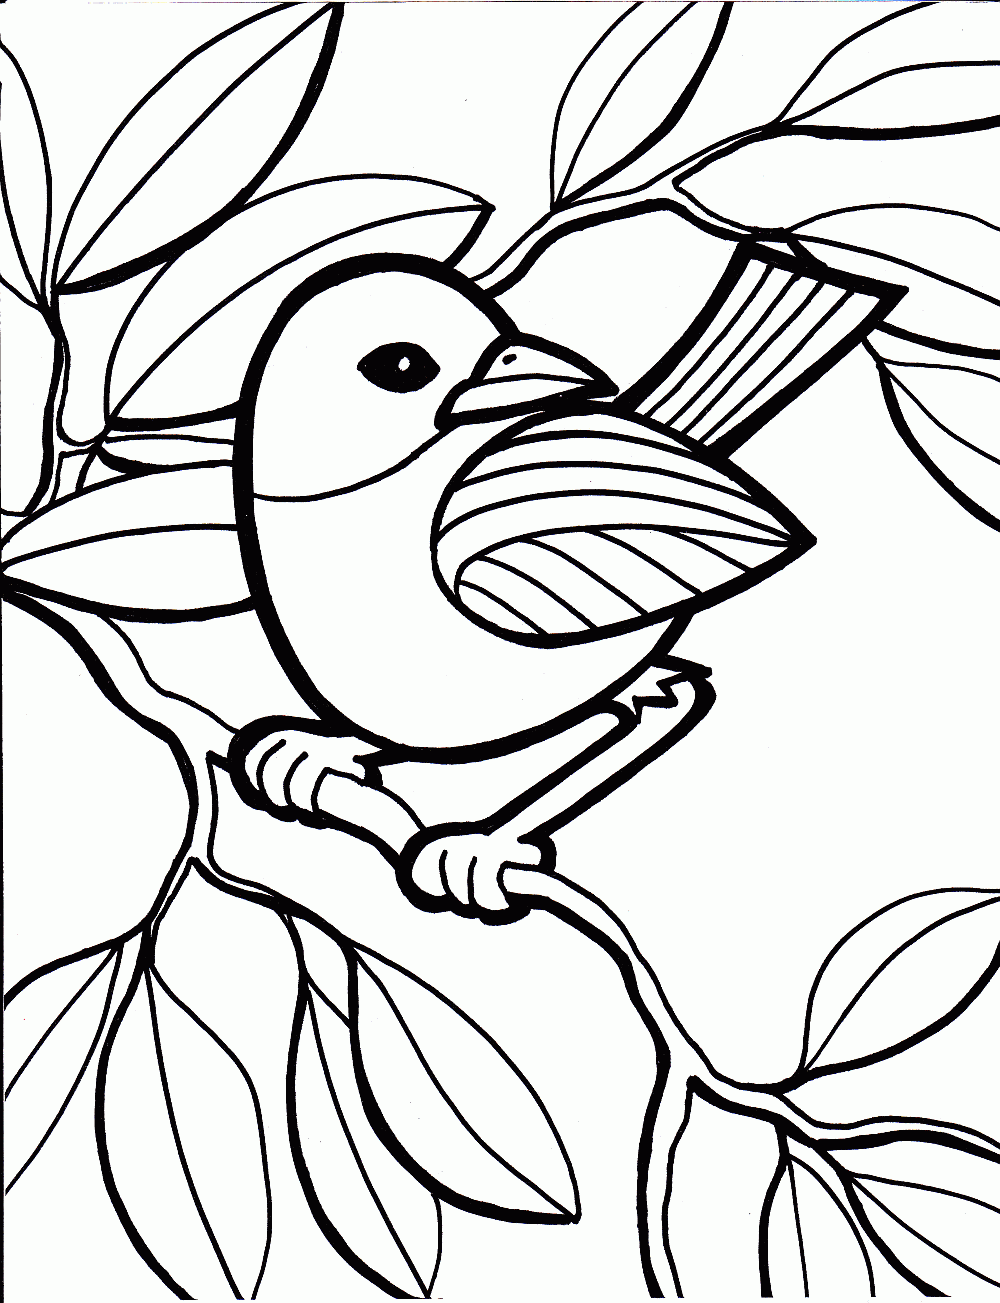 Download Coloring for Kids - Bird Coloring ~ Child Coloring